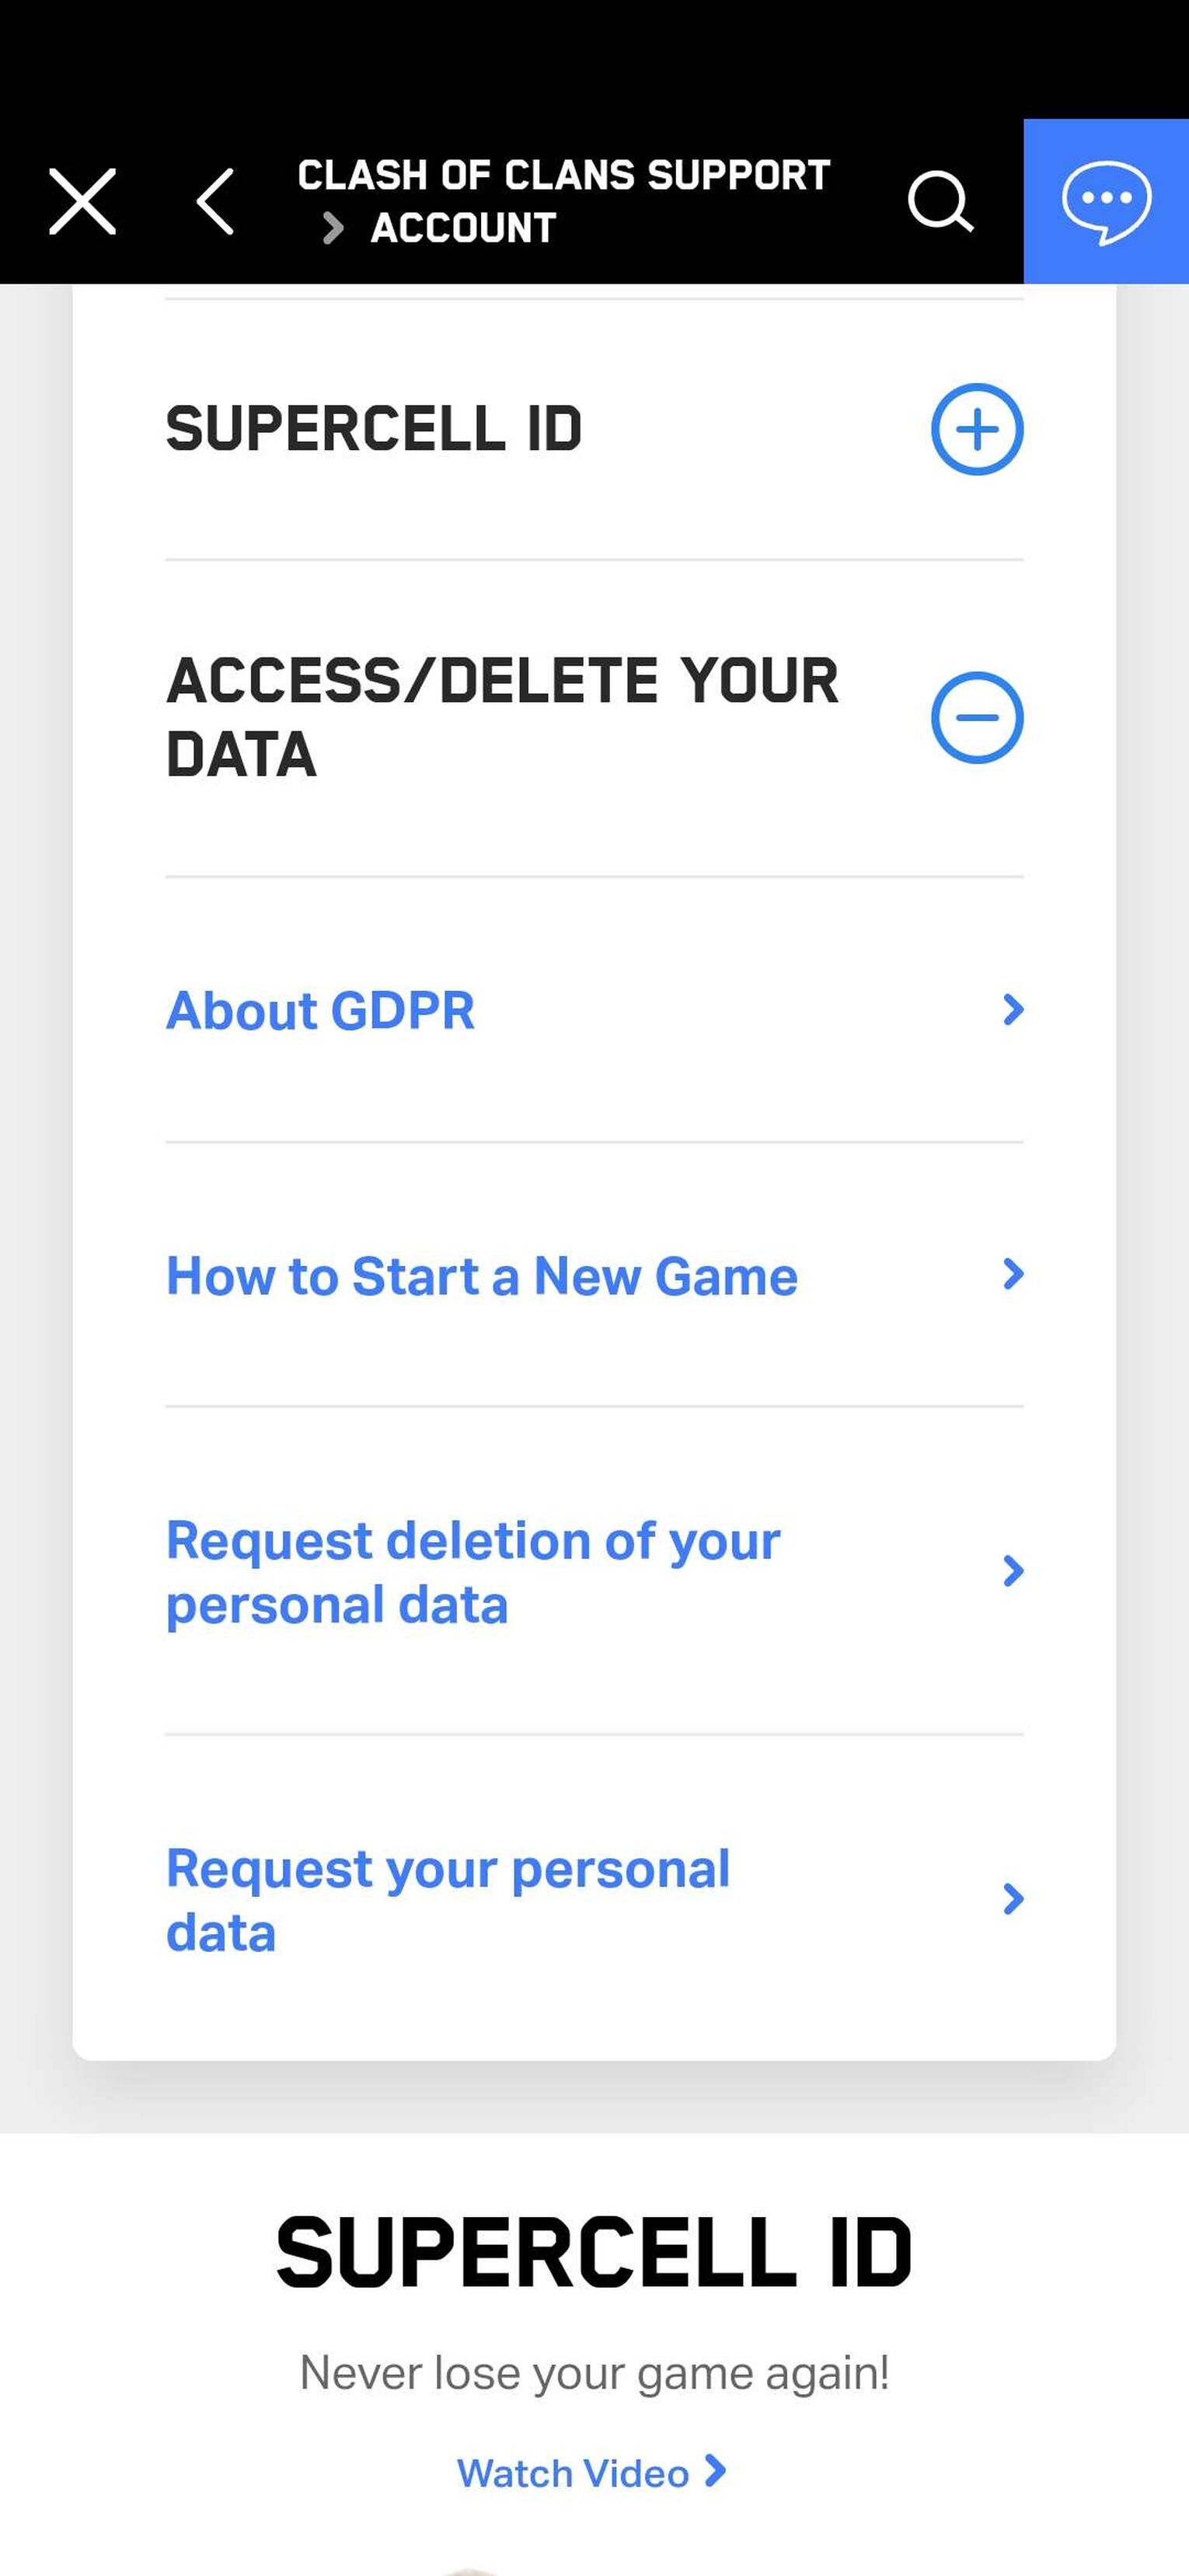 Request deletion of your personal data